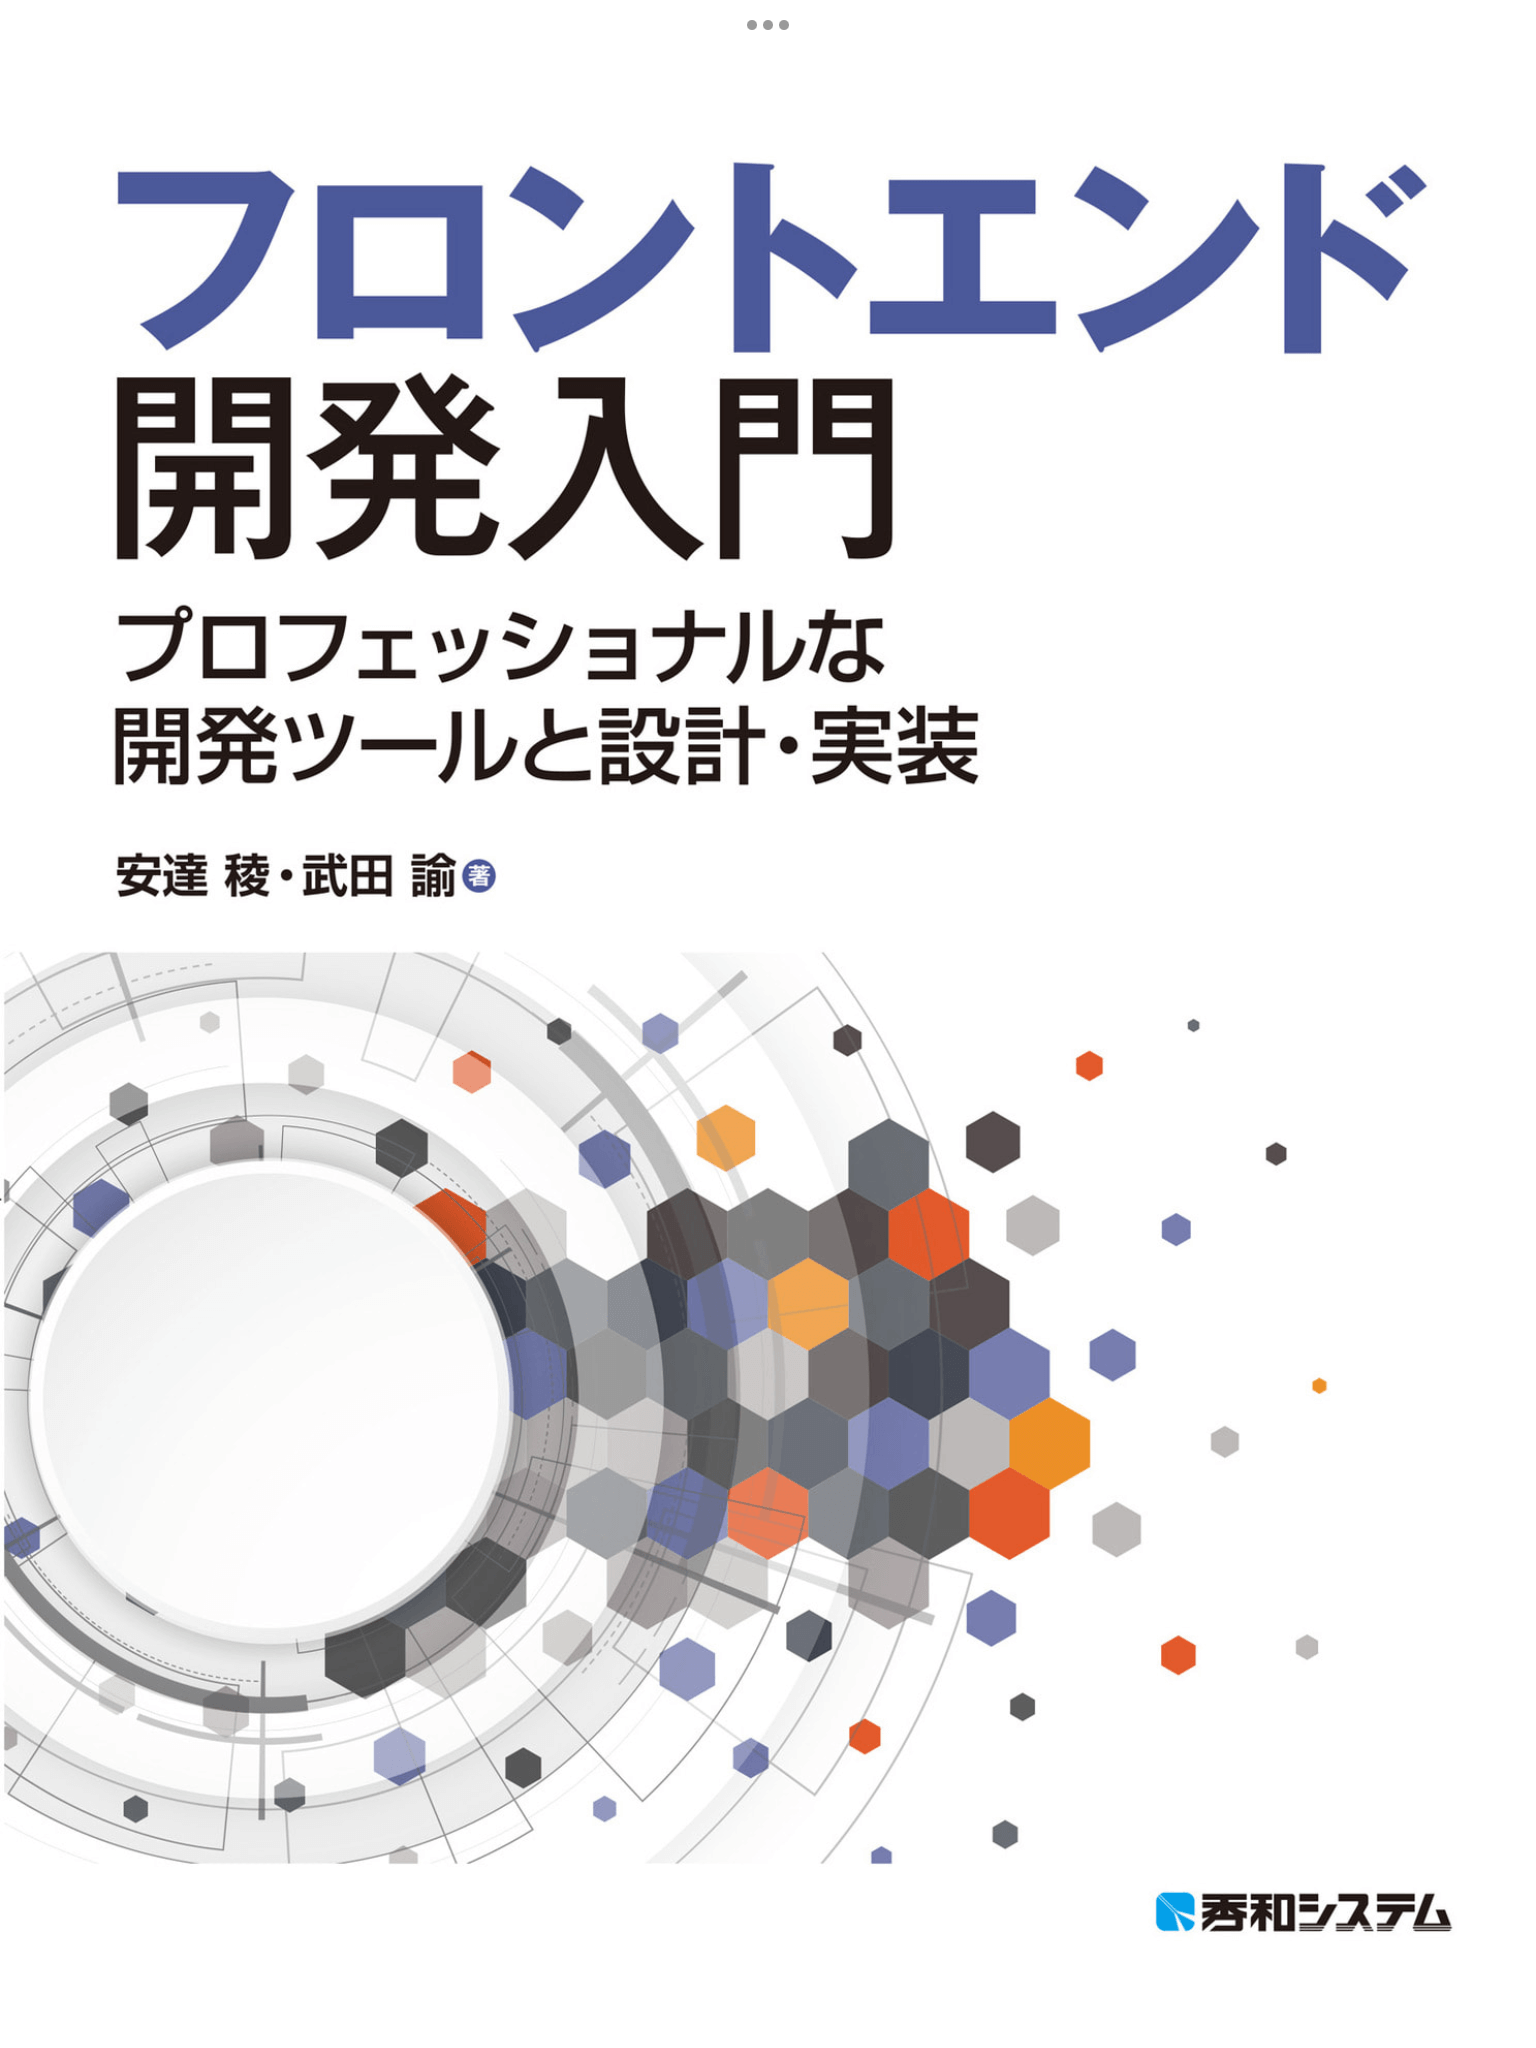 Cover image of the book "Introduction to front-end development Professional development tools and design and implementation (Ryo Adachi (Author), Satoshi Takeda (Author) / Shuwa System)"